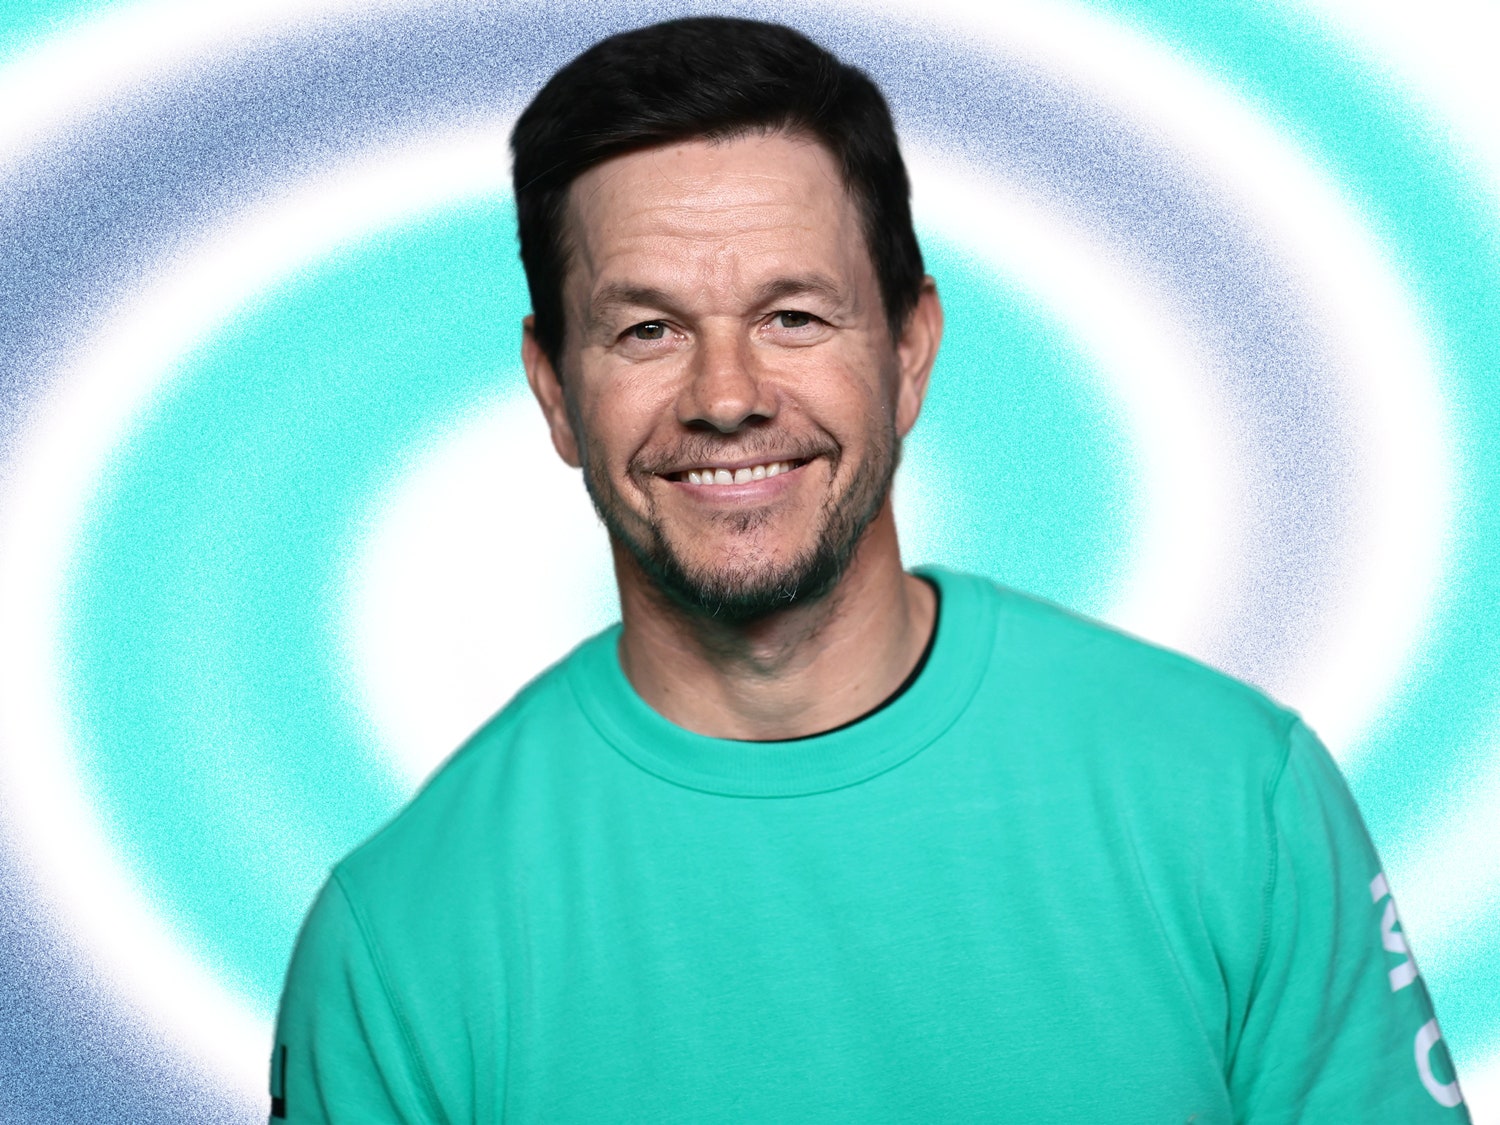 The Real-Life Diet of Mark Wahlberg, Who Gave Up His Own Tequila Brand for Lent